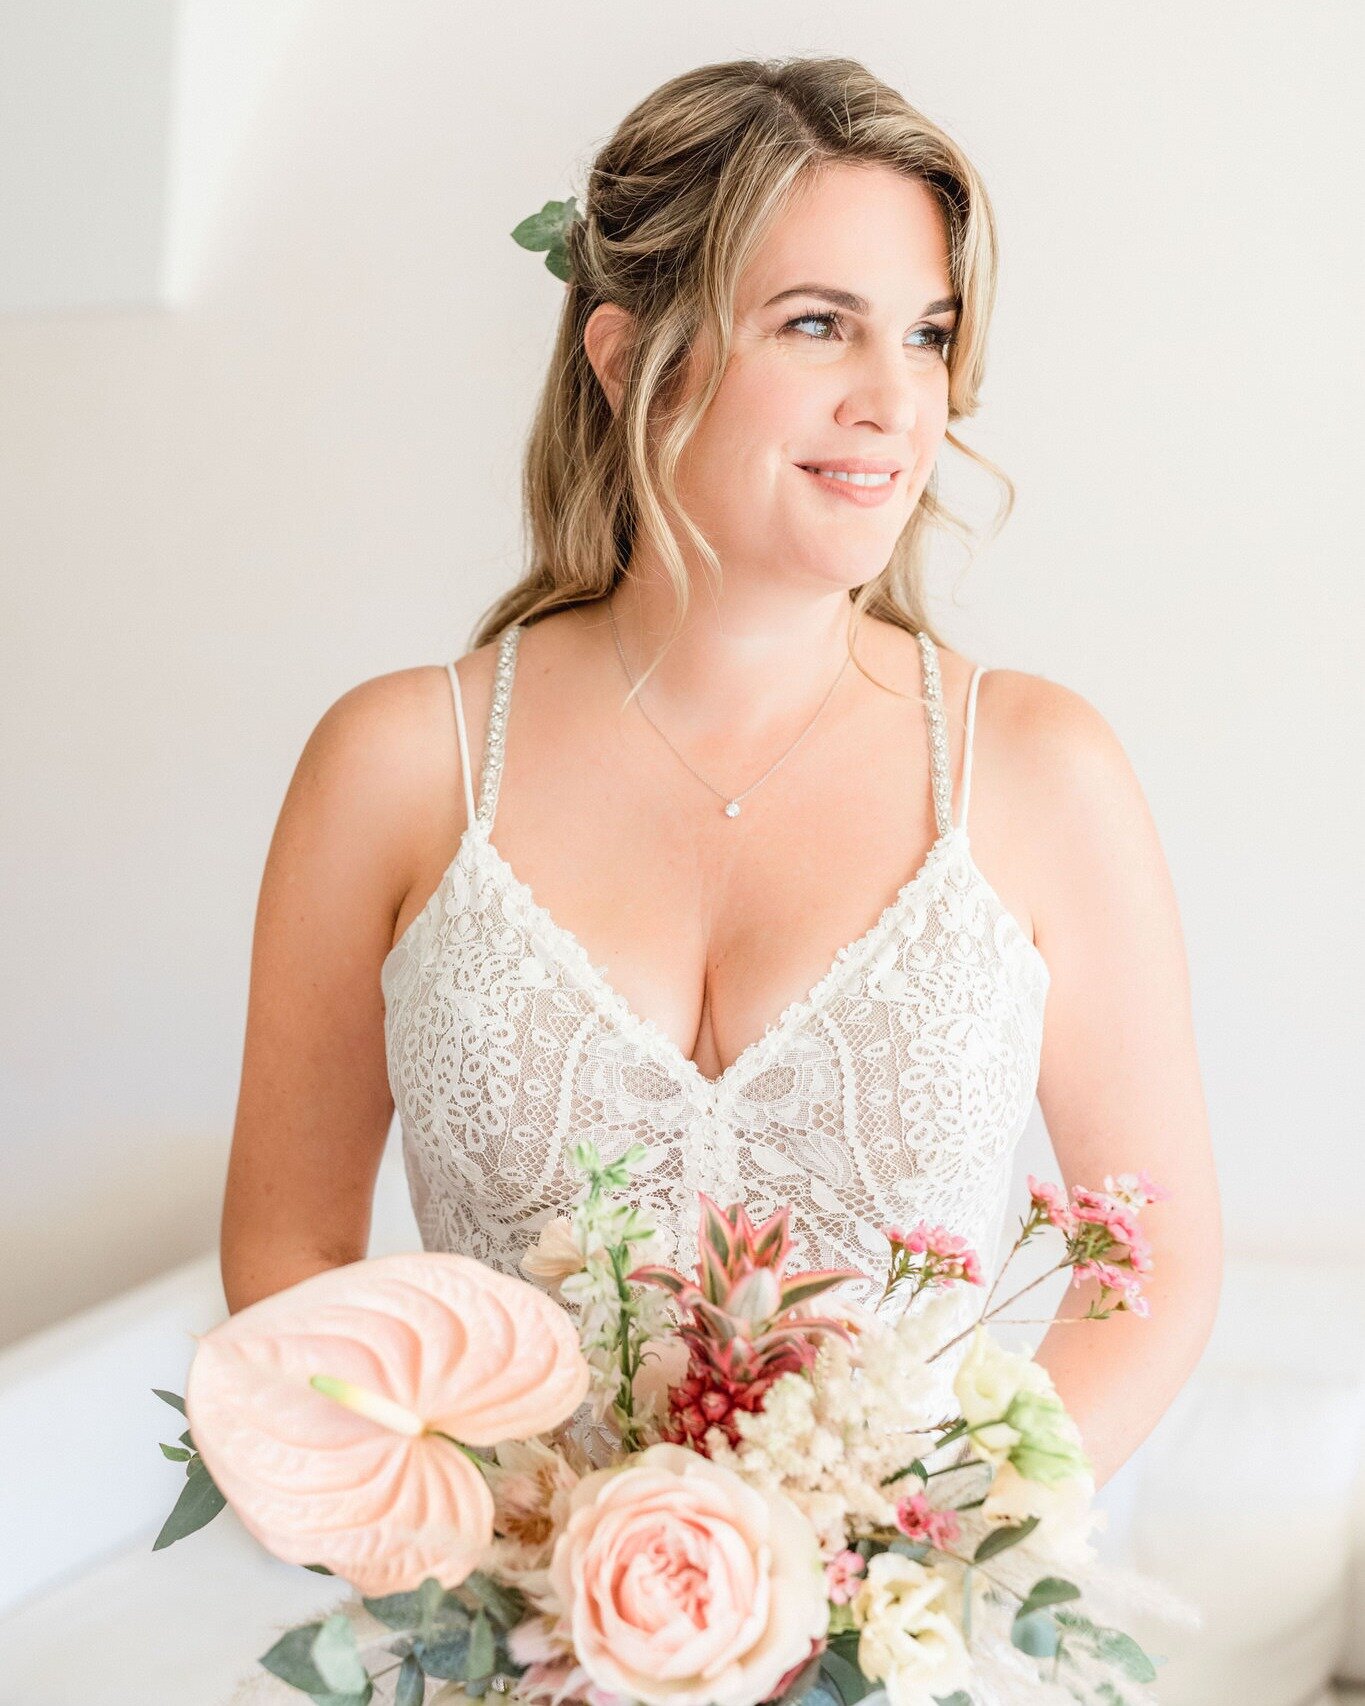 One of my favorite parts of the day to photograph is the Getting Ready of the bridal couple. The anticipation, the emotions, the details! I just love it. One little suggestion if you're having a photographer present during your preparations: Make sur